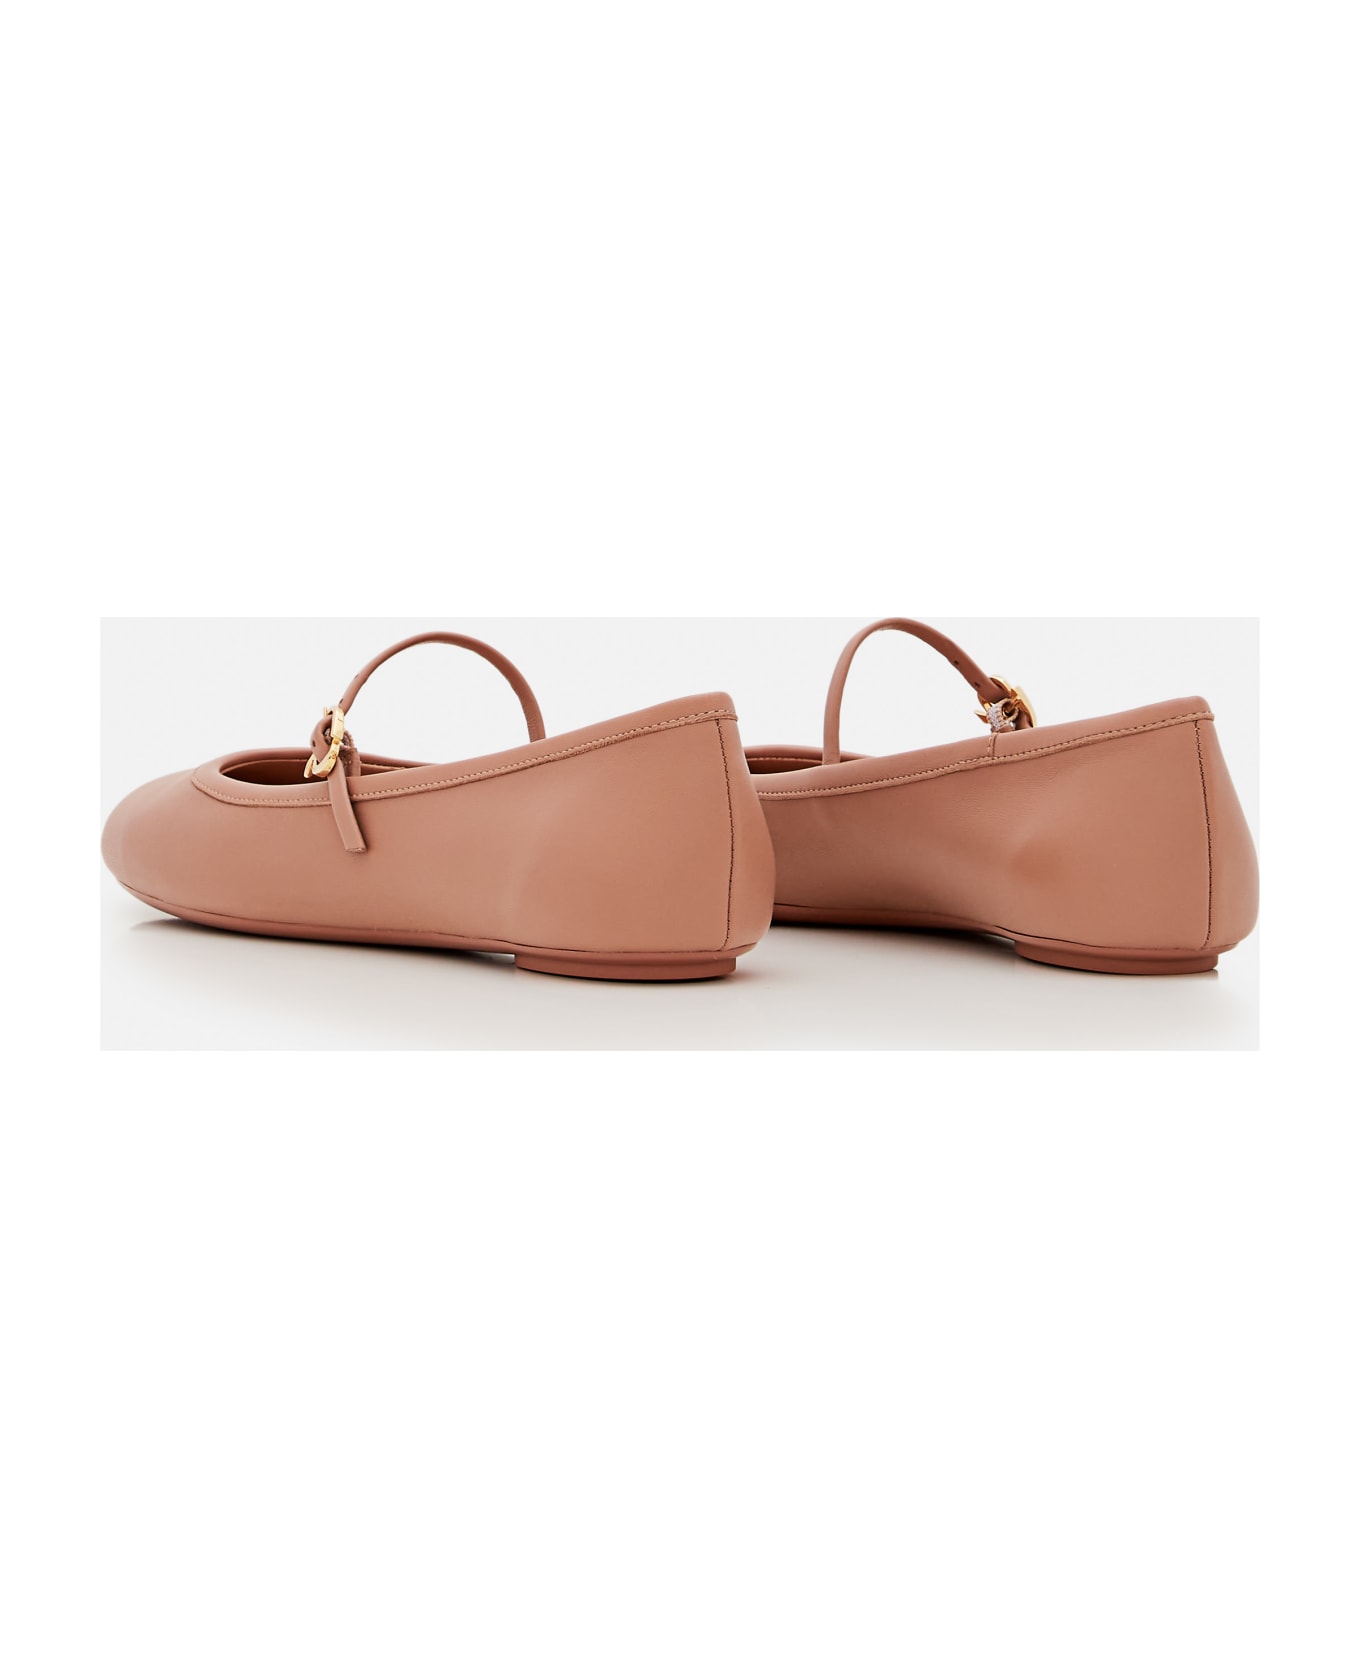 Gianvito Rossi Leather Ballet Flat - Pink